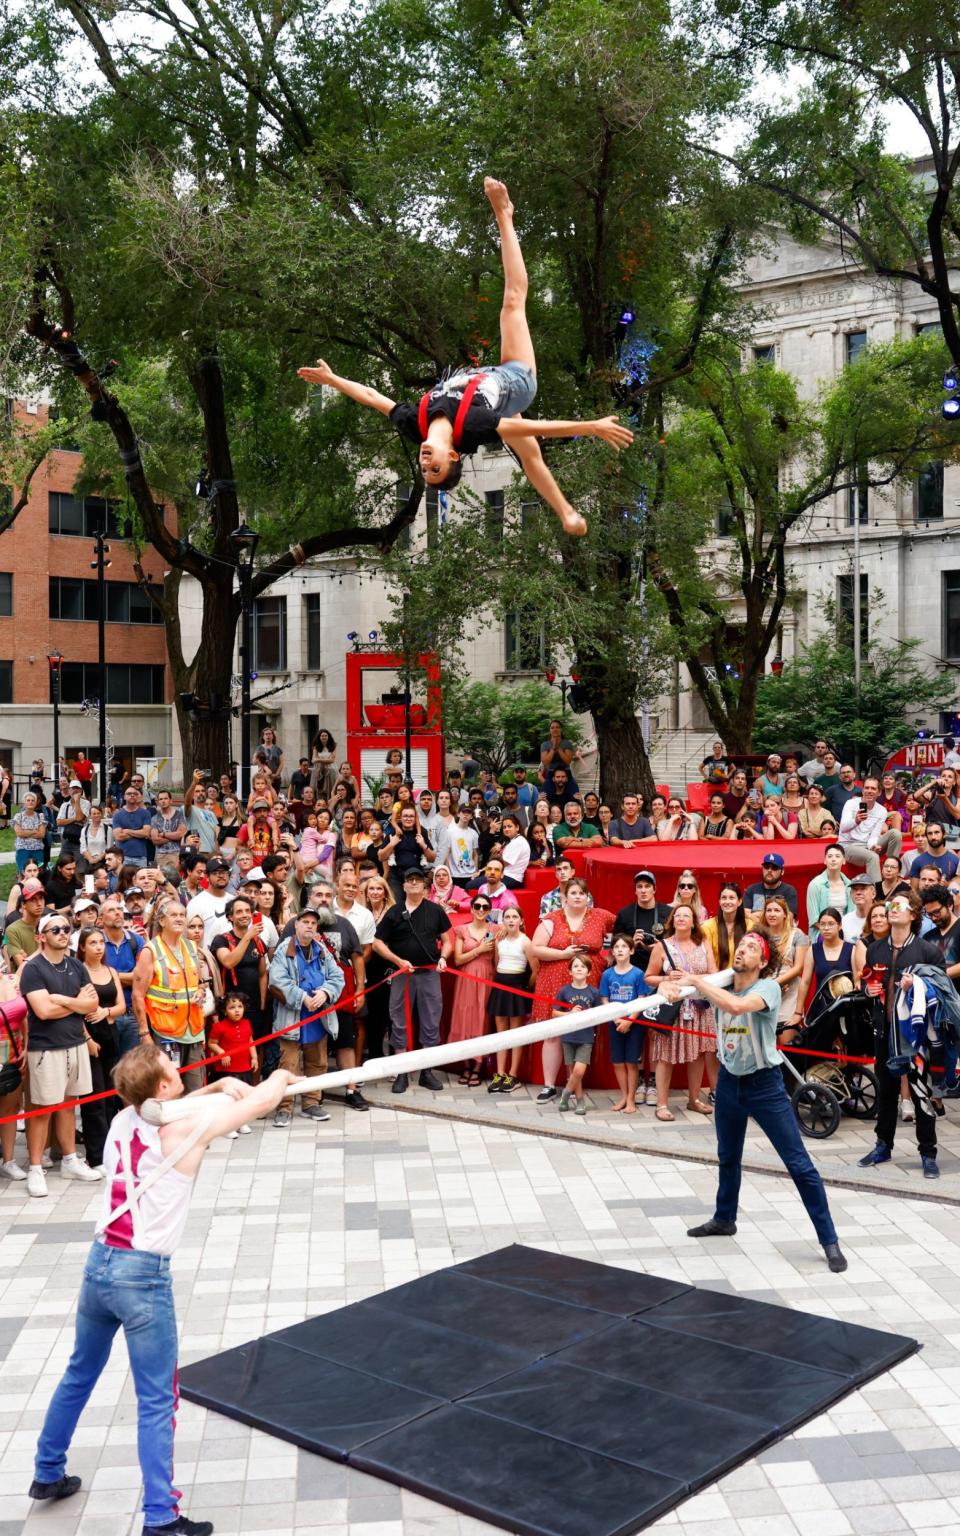 Festival city: a street circus from Montreal